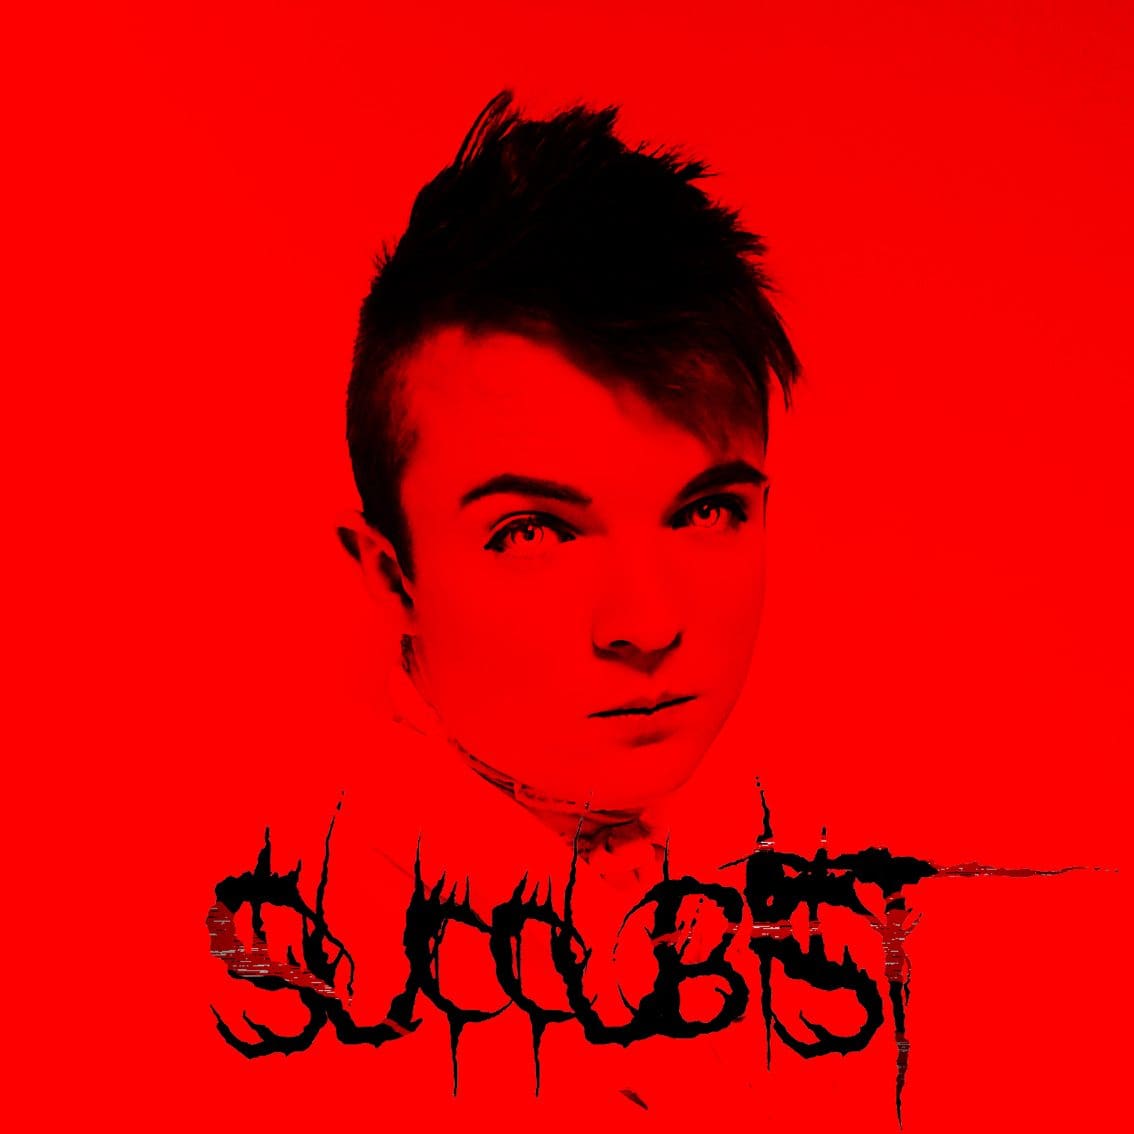 Japanese electronic project Succubist debuts with 'Blood Flow' album - preview it here